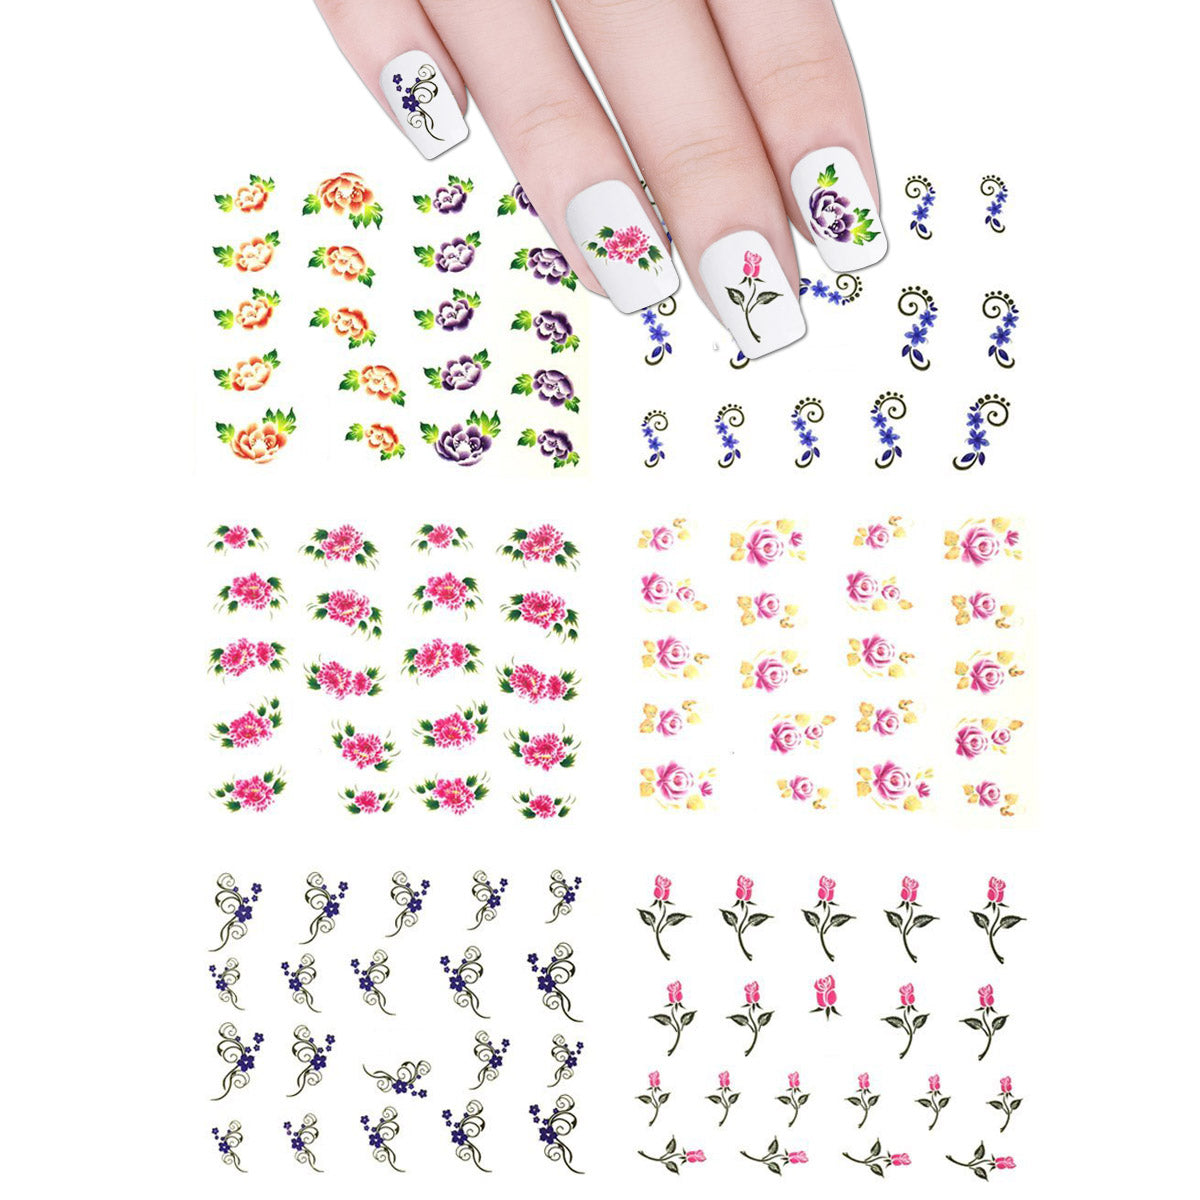 NAIL ANGEL 9 Sheets Nail Art Water Decals Water Transfer Sticker Lips  Beauty Different Patterns Decals for fingernail and toenail Manicure 10190